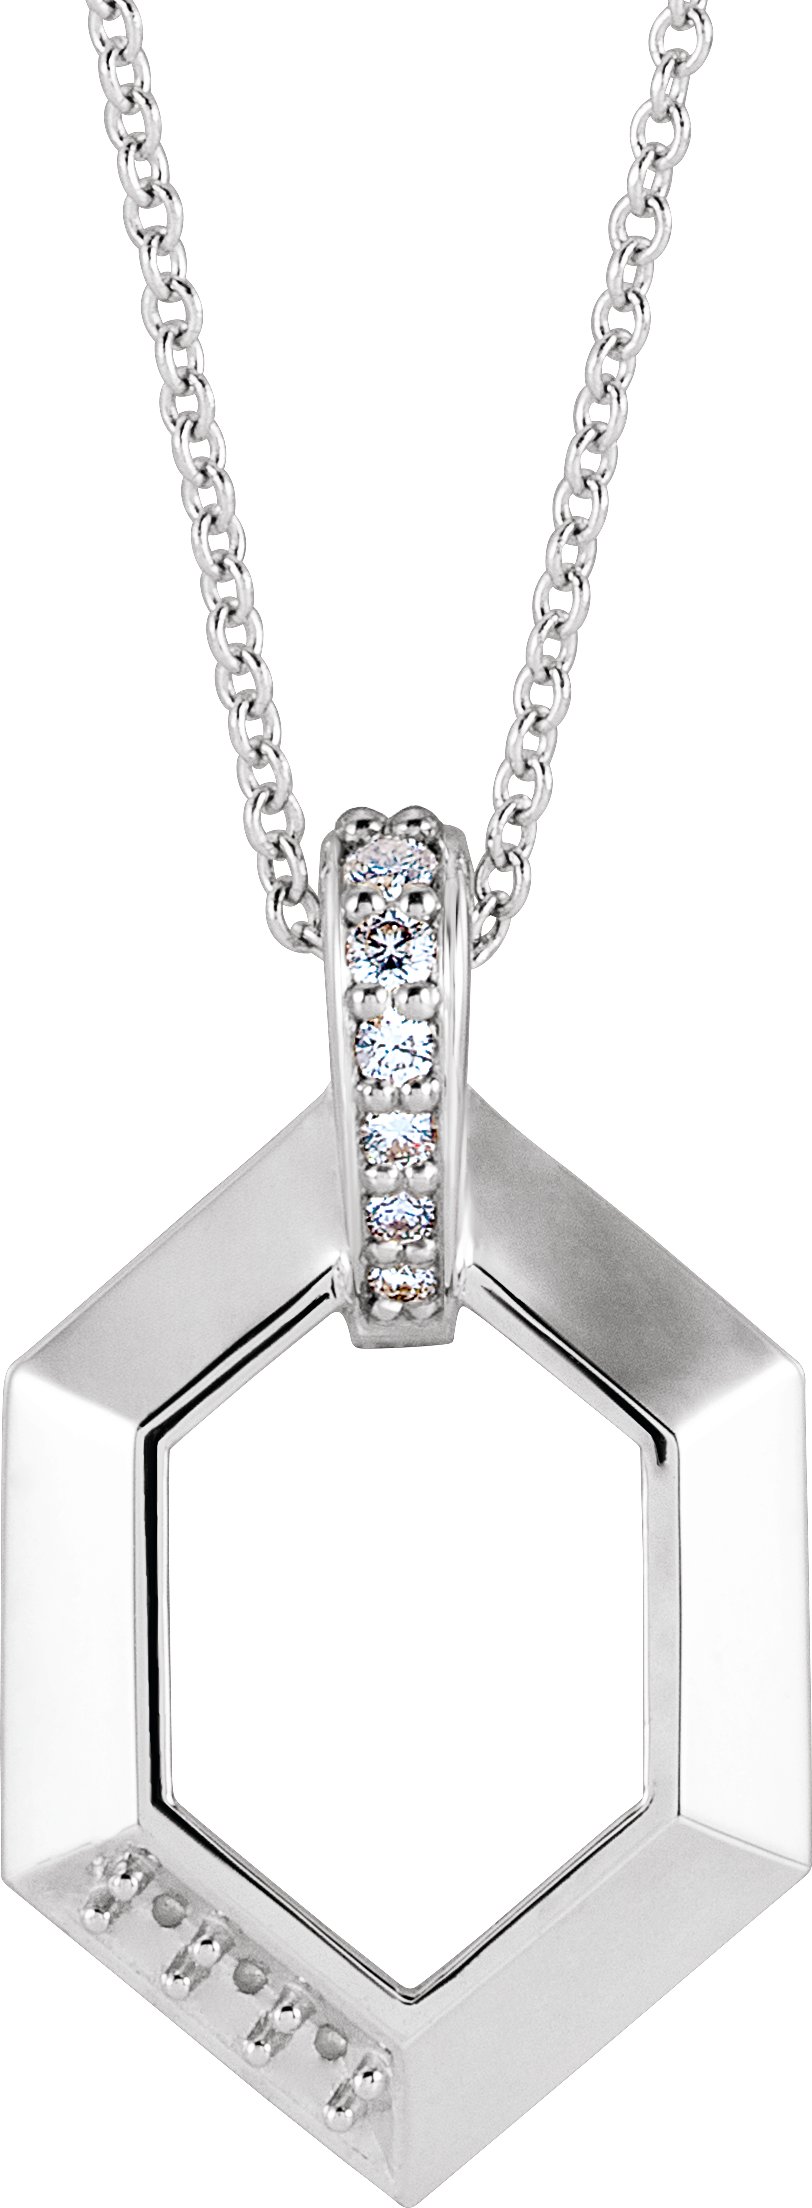 Sterling Silver 1 Stone Group .06 CTW Diamond Semi Set Family 16 18 inch Necklace Ref. 16691508